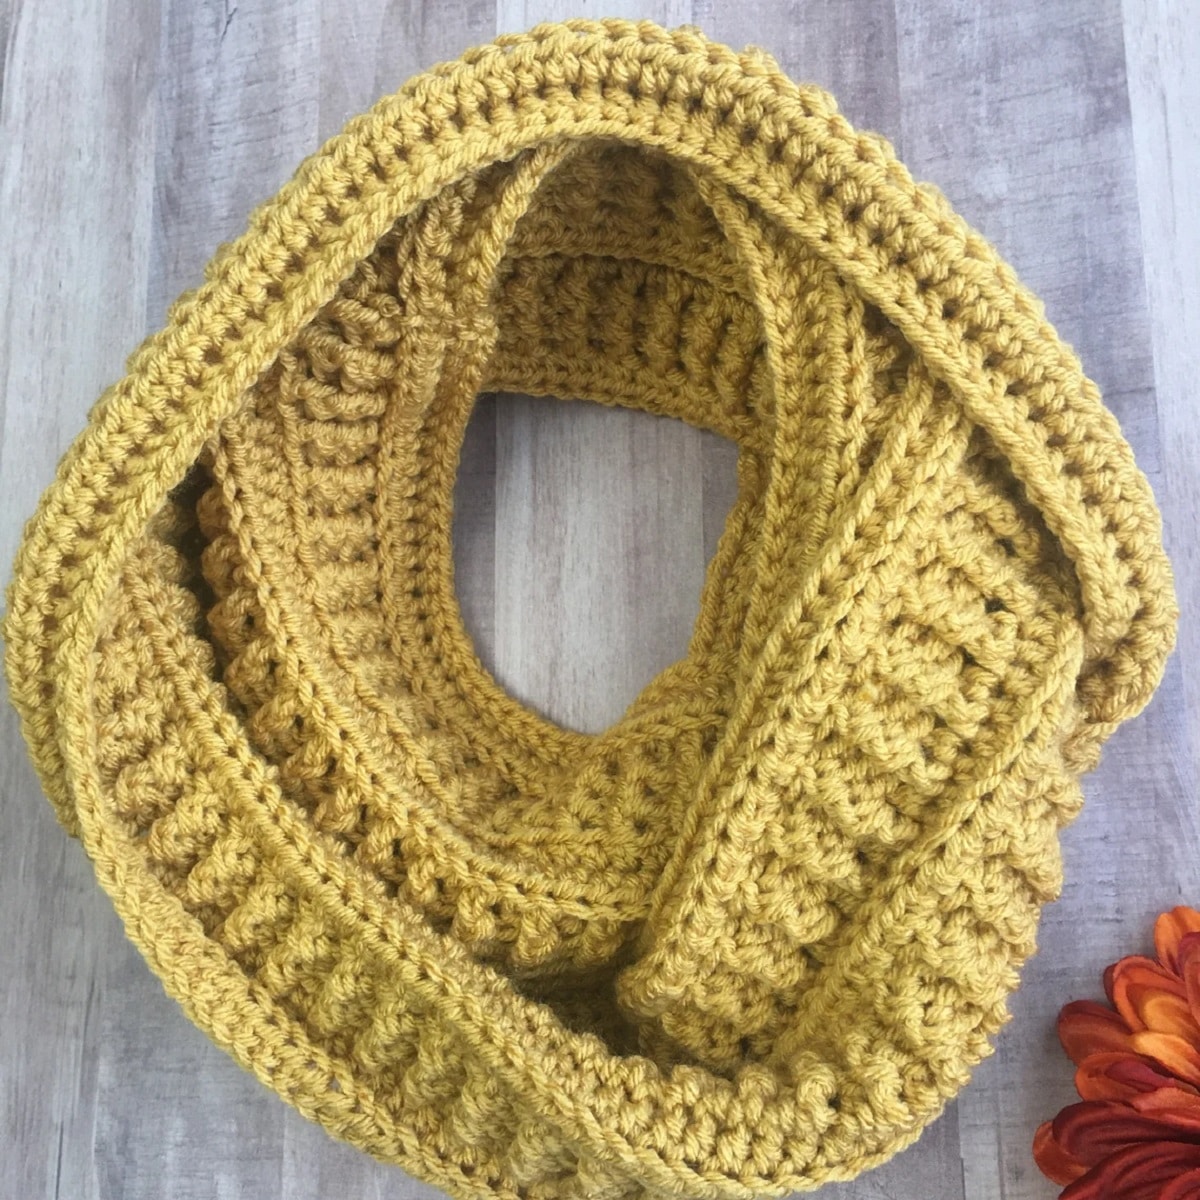  Yellow crochet infinity scarf with thick vertical lines and a horizontal trim wrapped into a circle on gray wooden flooring.